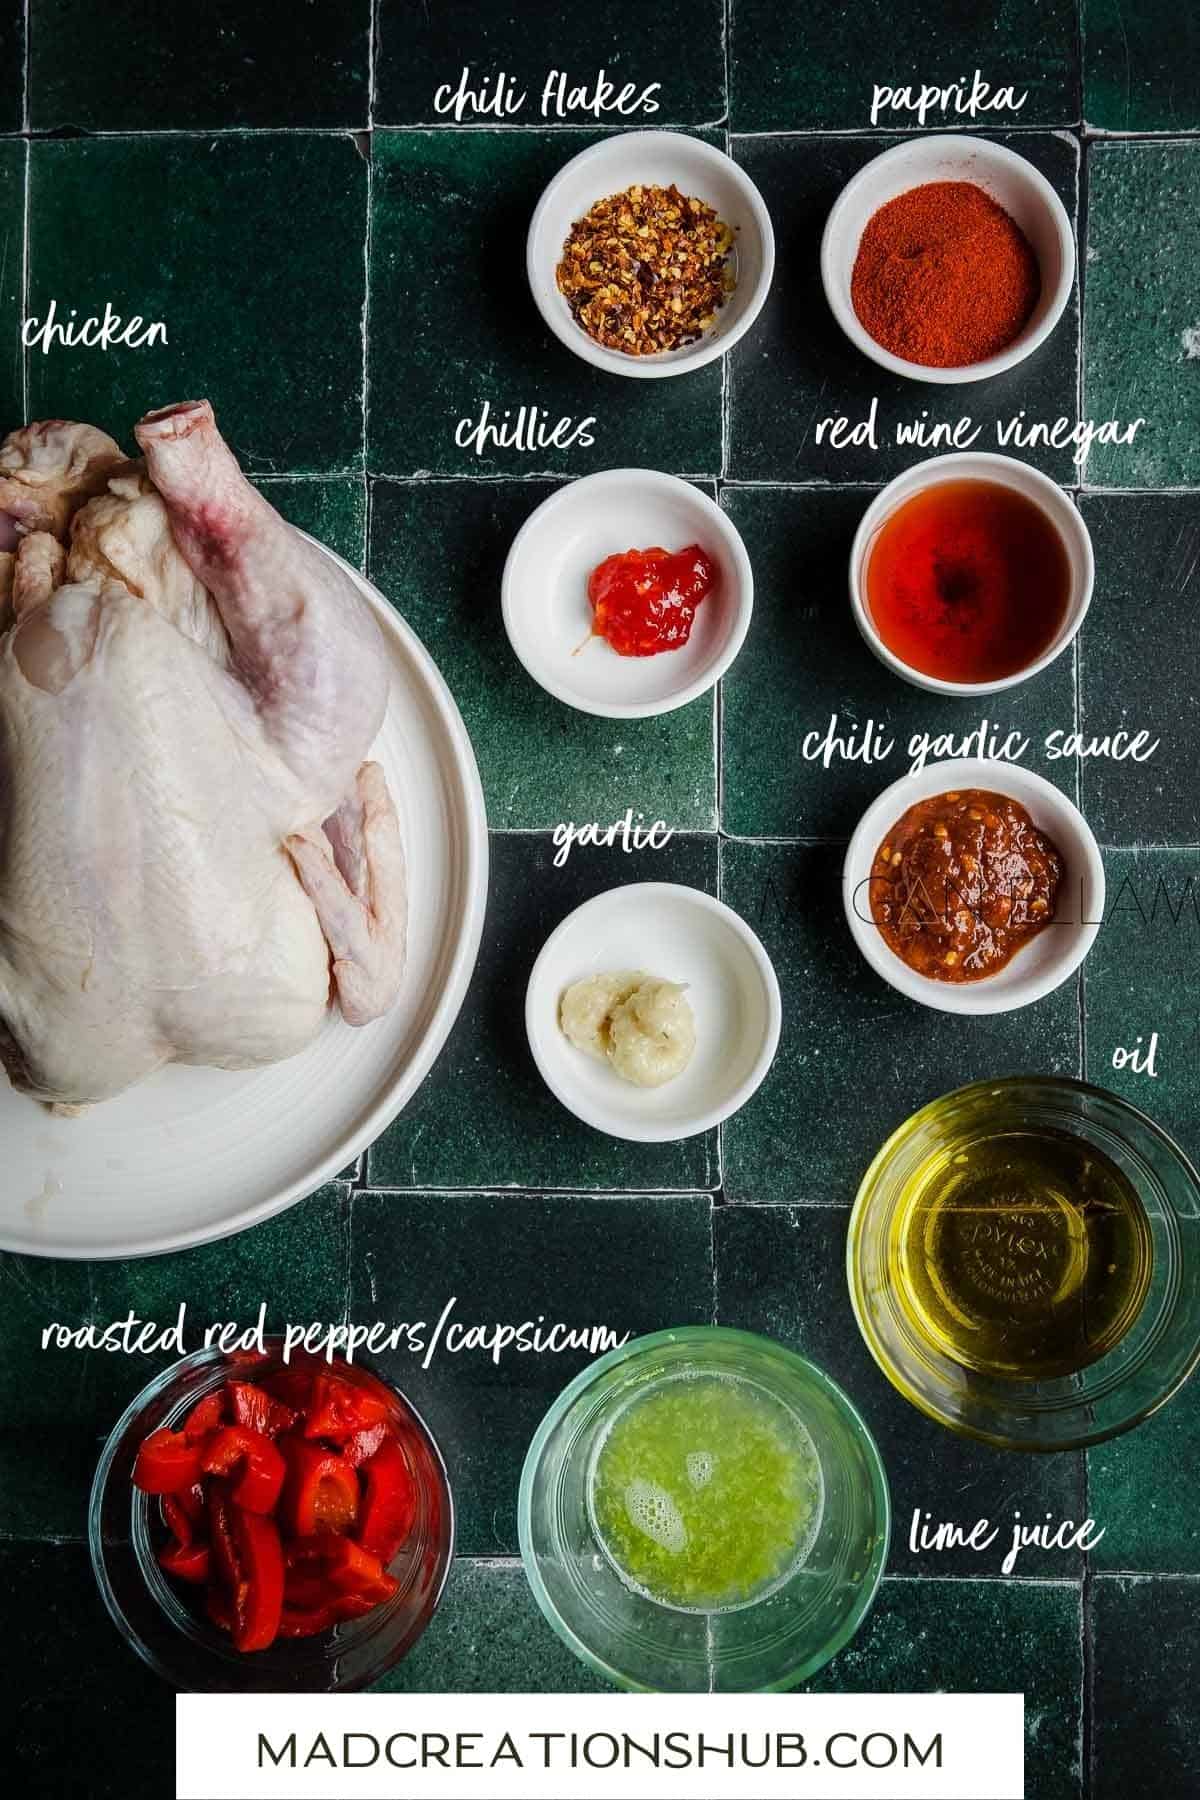 All the ingredients for Peri Peri Chicken on a green tiled backdrop.